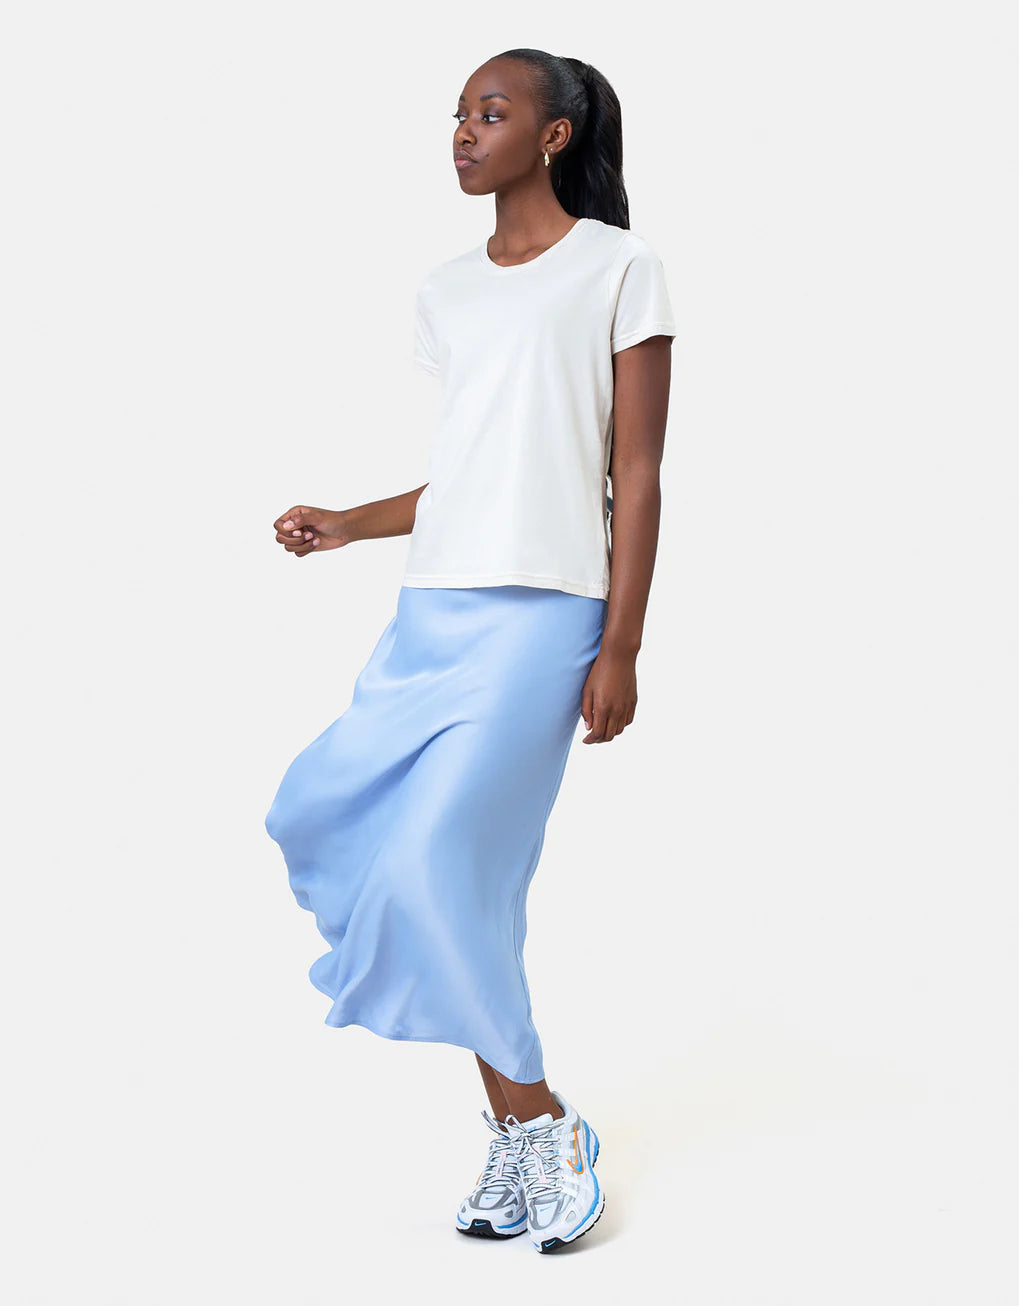 A woman in a white Light Organic Tee from Colorful Standard and a blue skirt paired with sneakers walks to showcase an outfit.